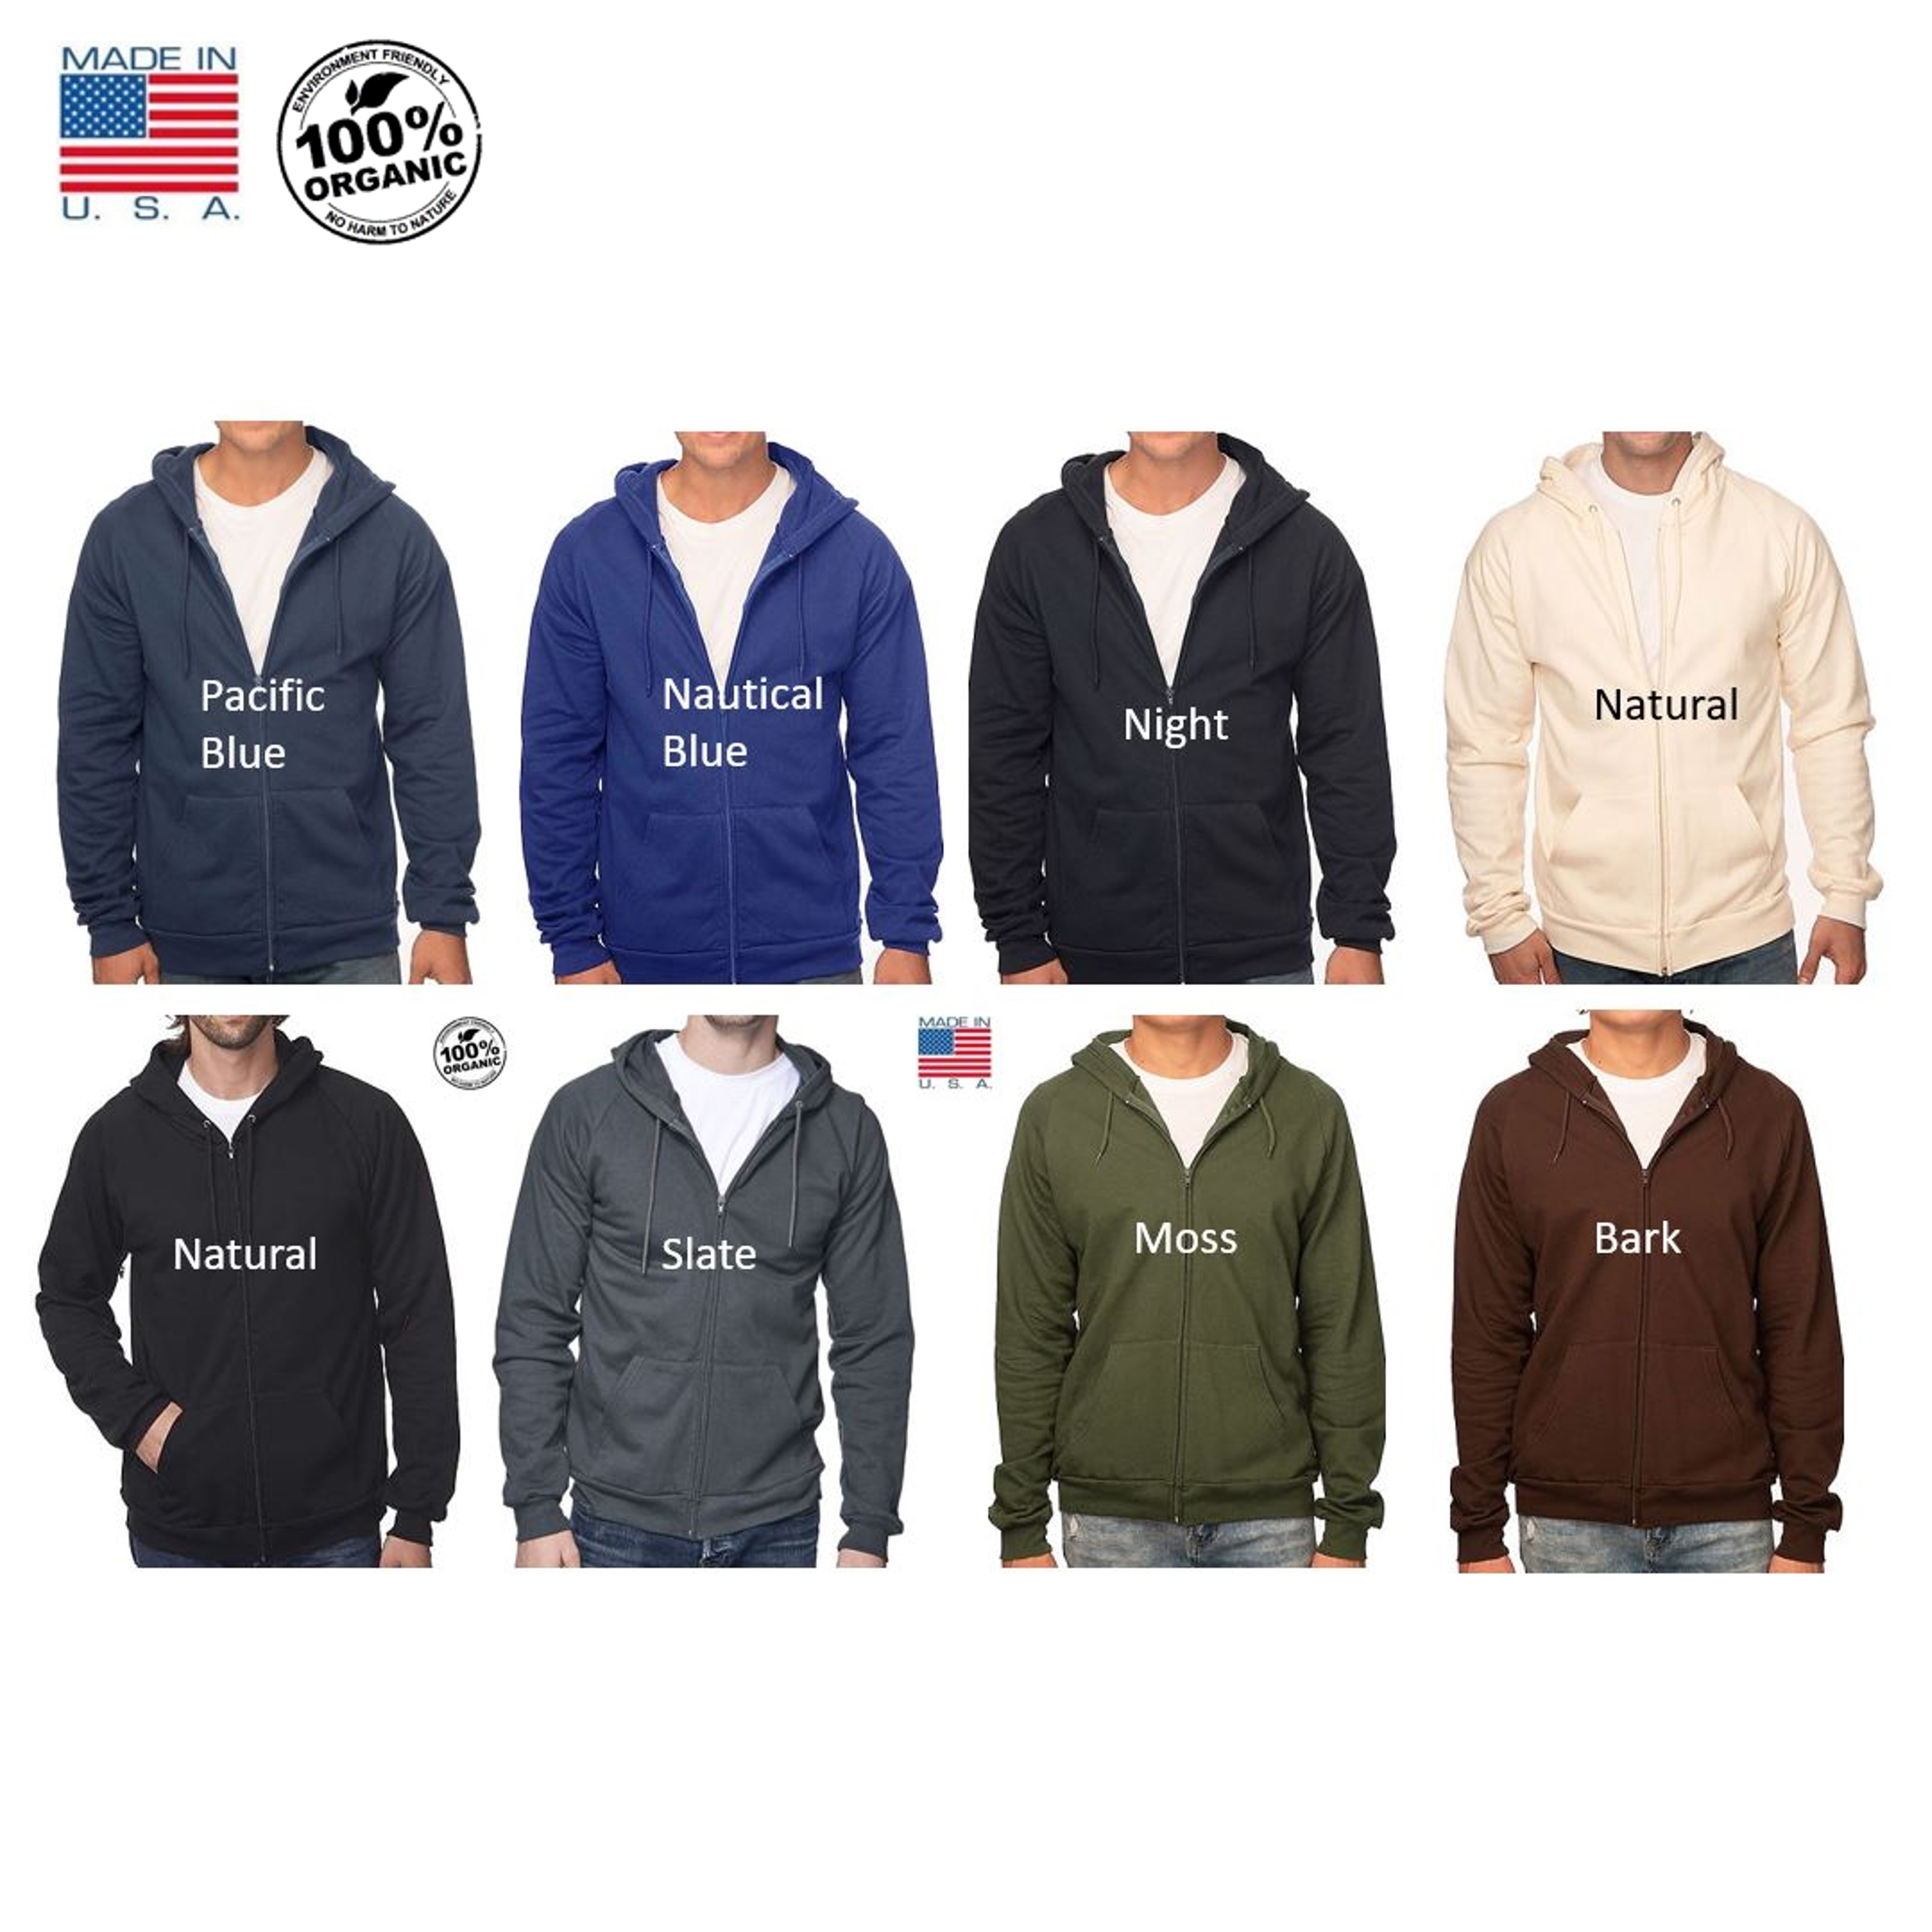 USA made organic cotton full zip hoodie colors imprinted